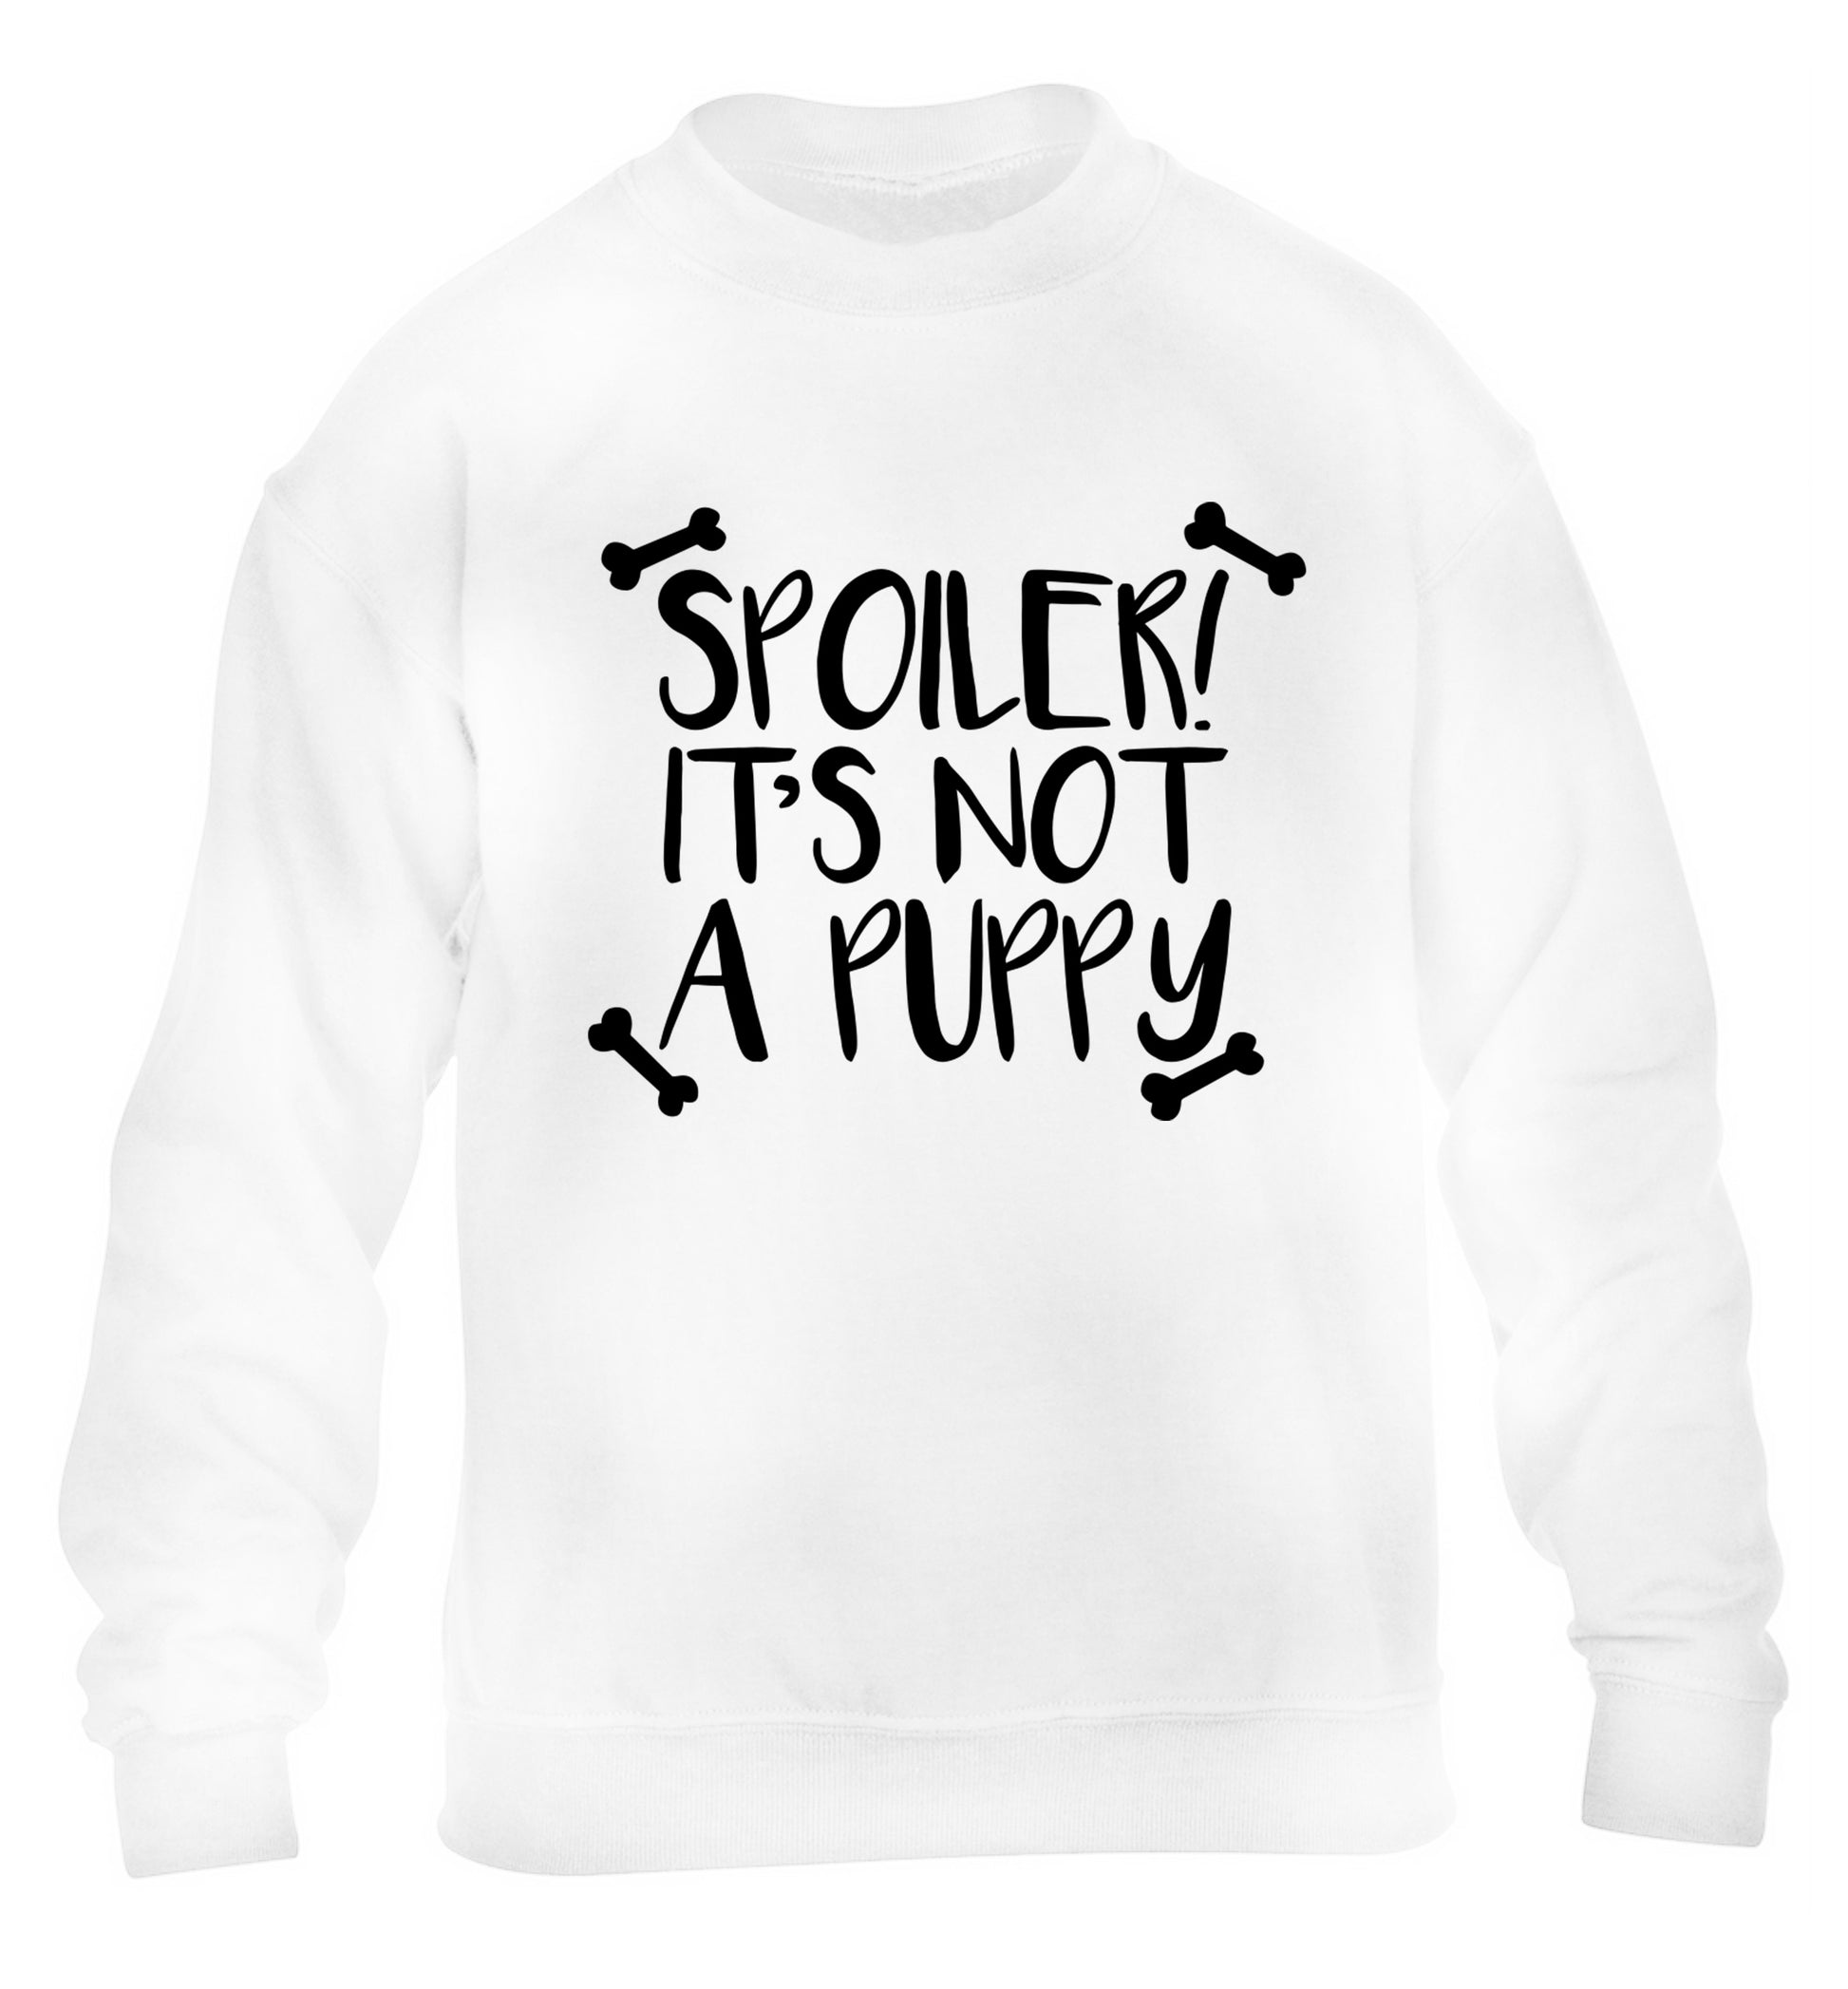 Spoiler it's not a puppy children's white sweater 12-13 Years